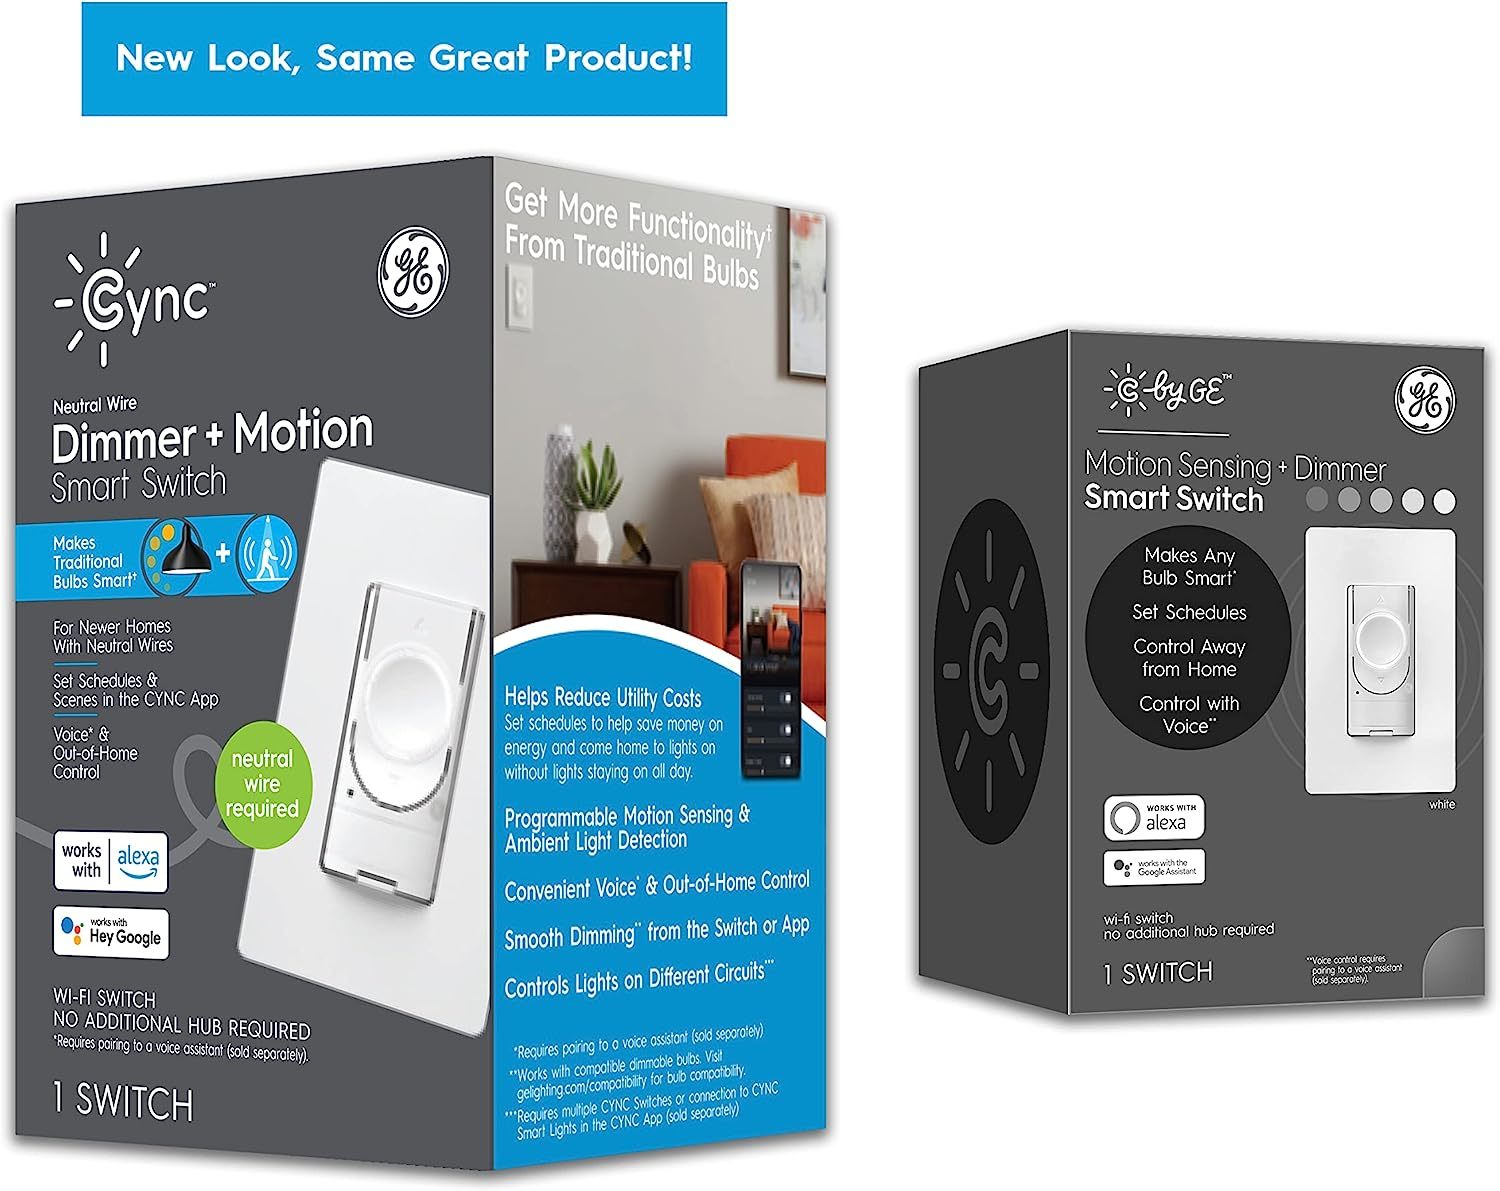 Primary image for Ge Lighting Cync Smart Dimmer Light Switch + Motion Sensor,, Packaging May Vary